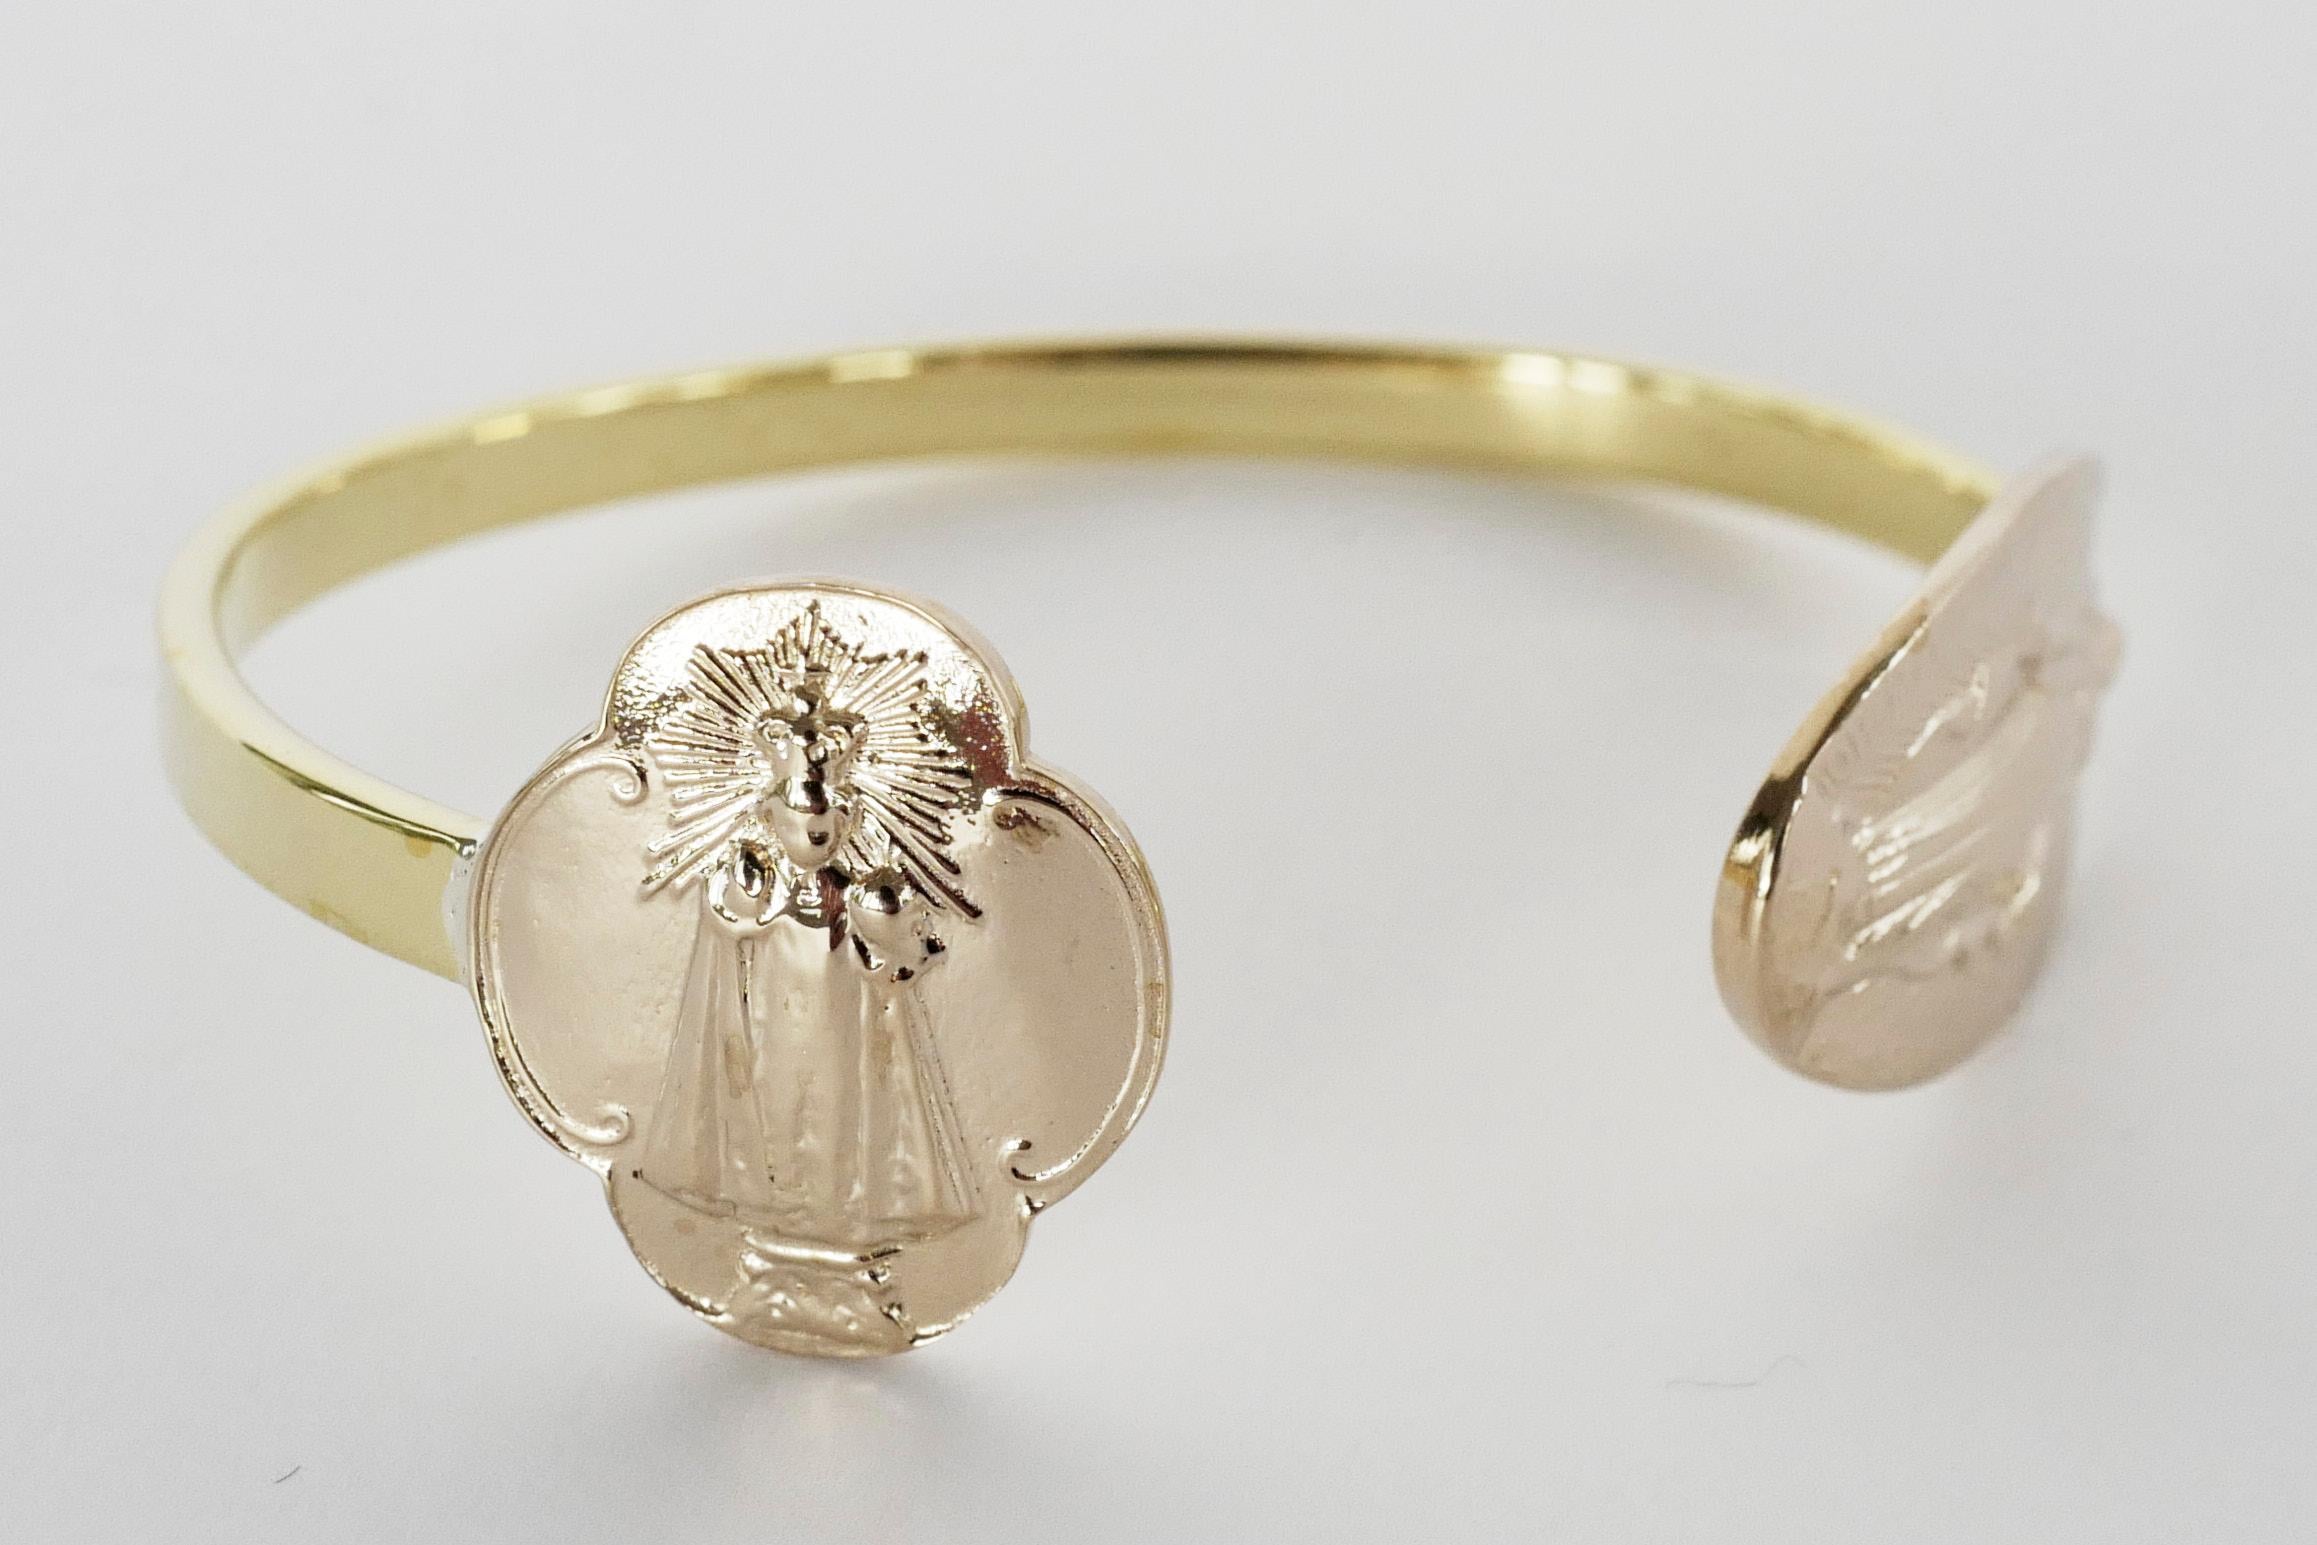 Virgin Mary Medal Bracelet Bangle Cuff Gold Plated J Dauphin

Symbols or medals can become a powerful tool in our arsenal for the spiritual. 
Since ancient times spiritual pendants, religious medals has been used to protect us. During challenging